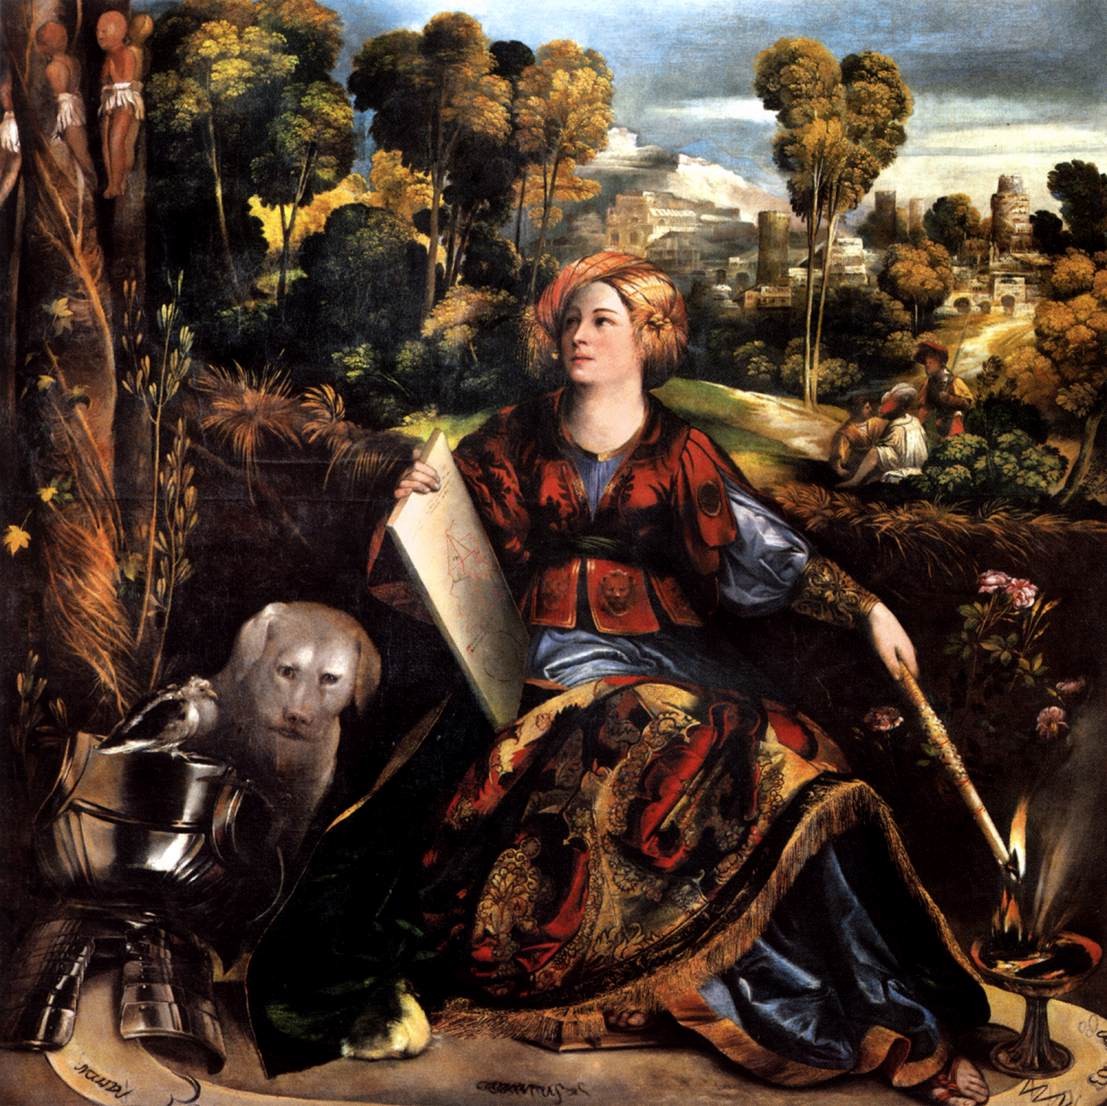 Dosso Dossi, life and works of the sixteenth-century magical artist 